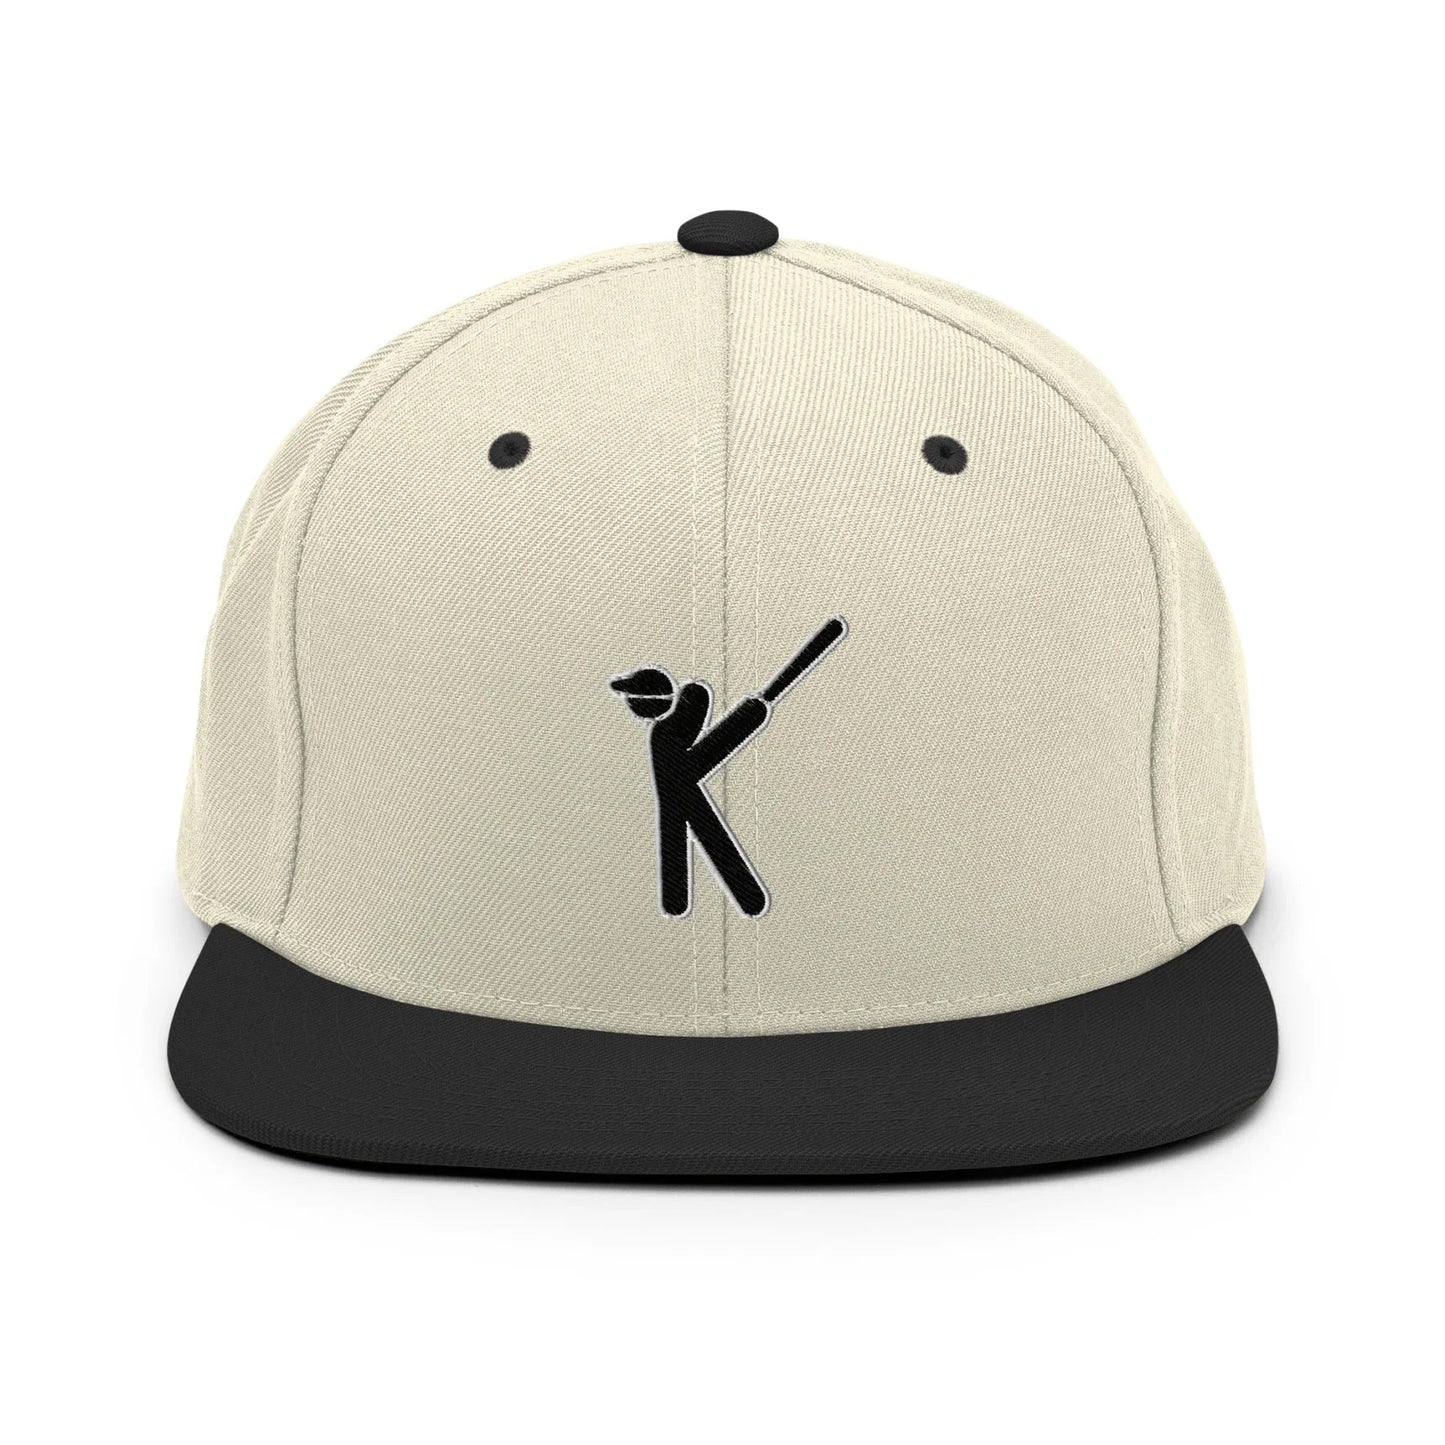 Kasabe ShowZone snapback hat in natural white with black brim and accents